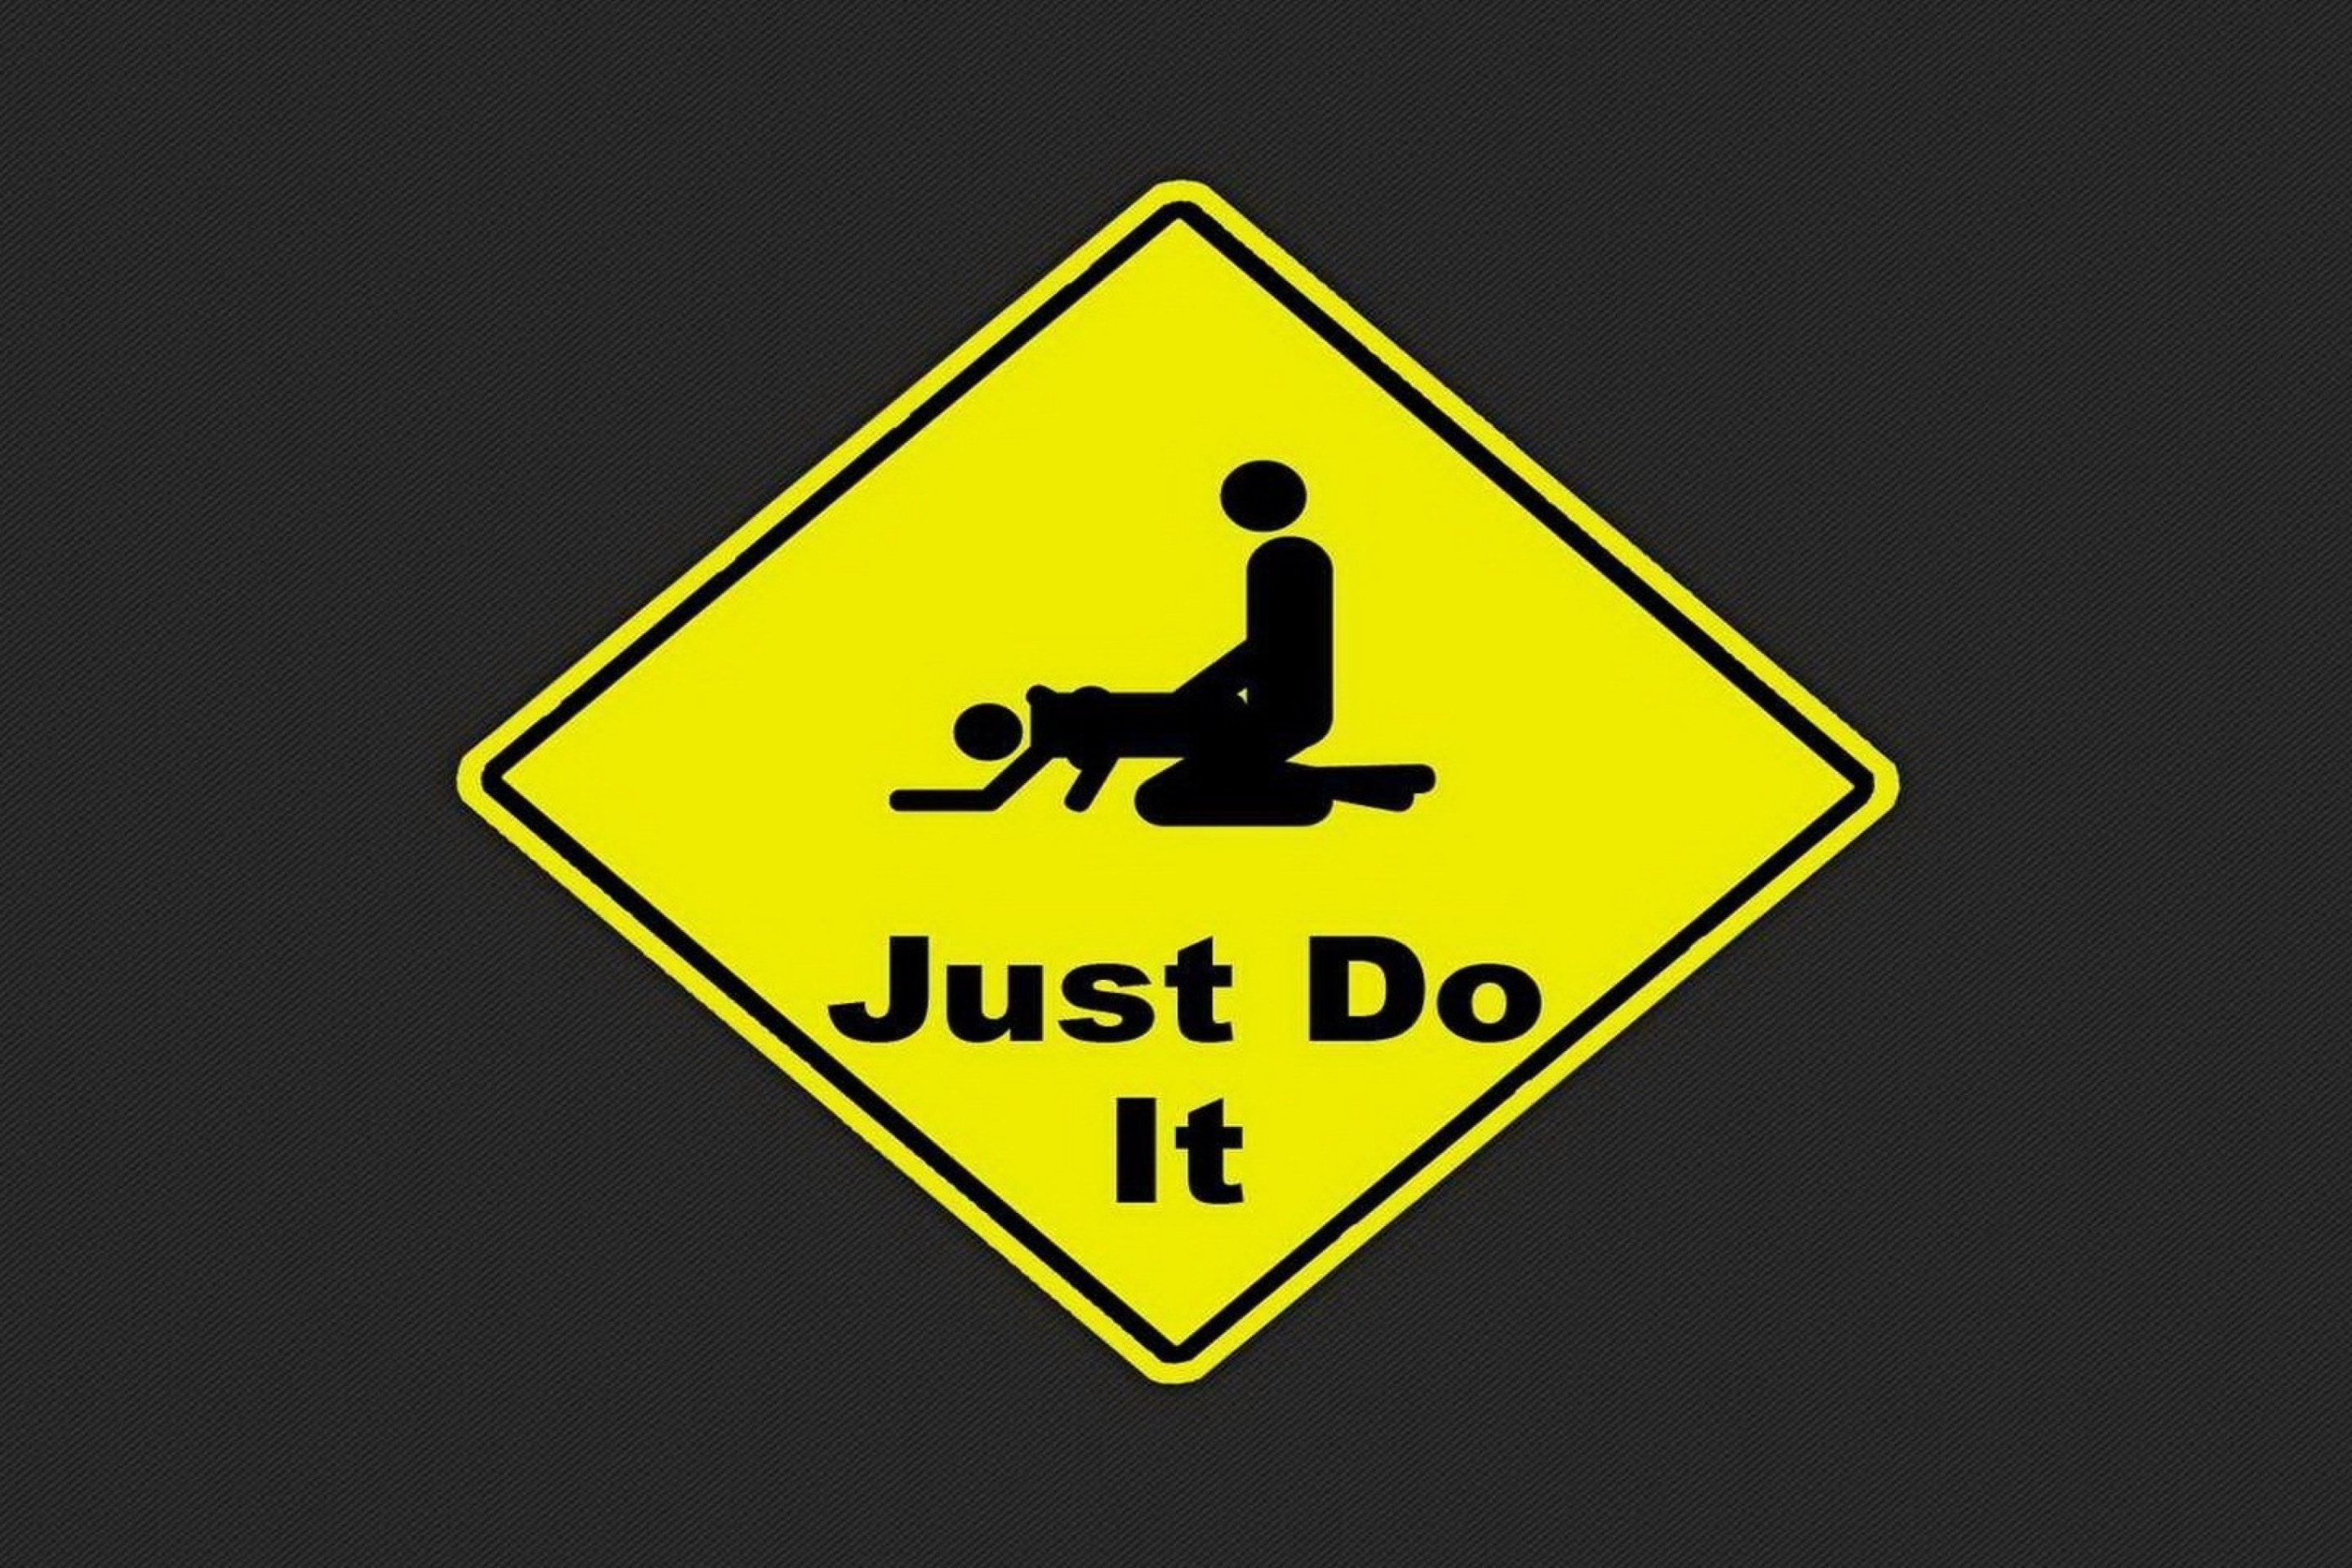 Das Just Do It Funny Sign Wallpaper 2880x1920